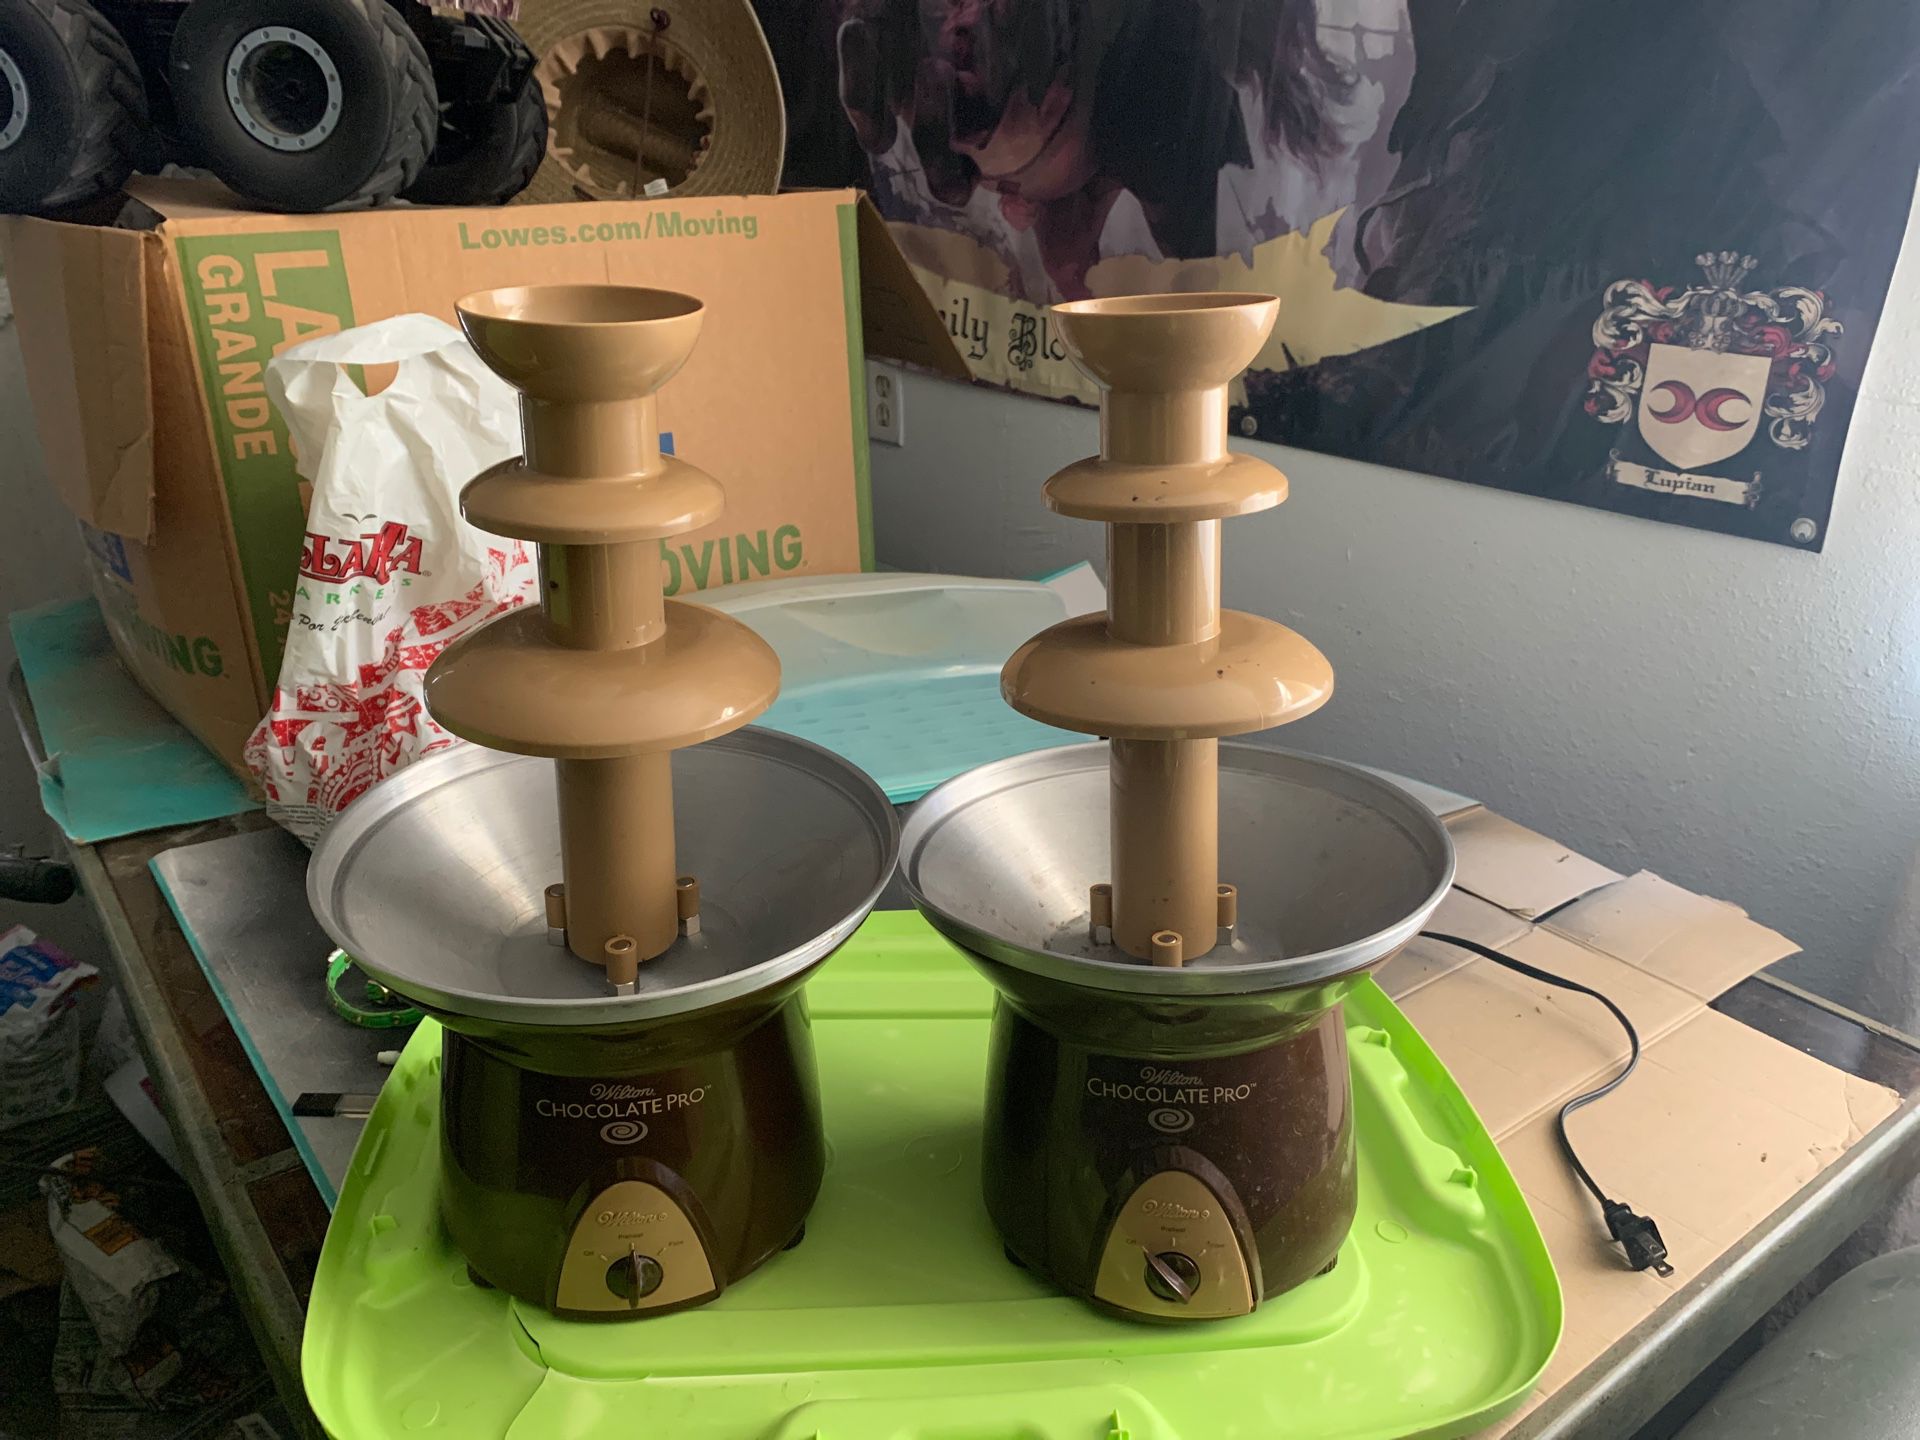 Two used Wilson chocolate pro fountains both sold together